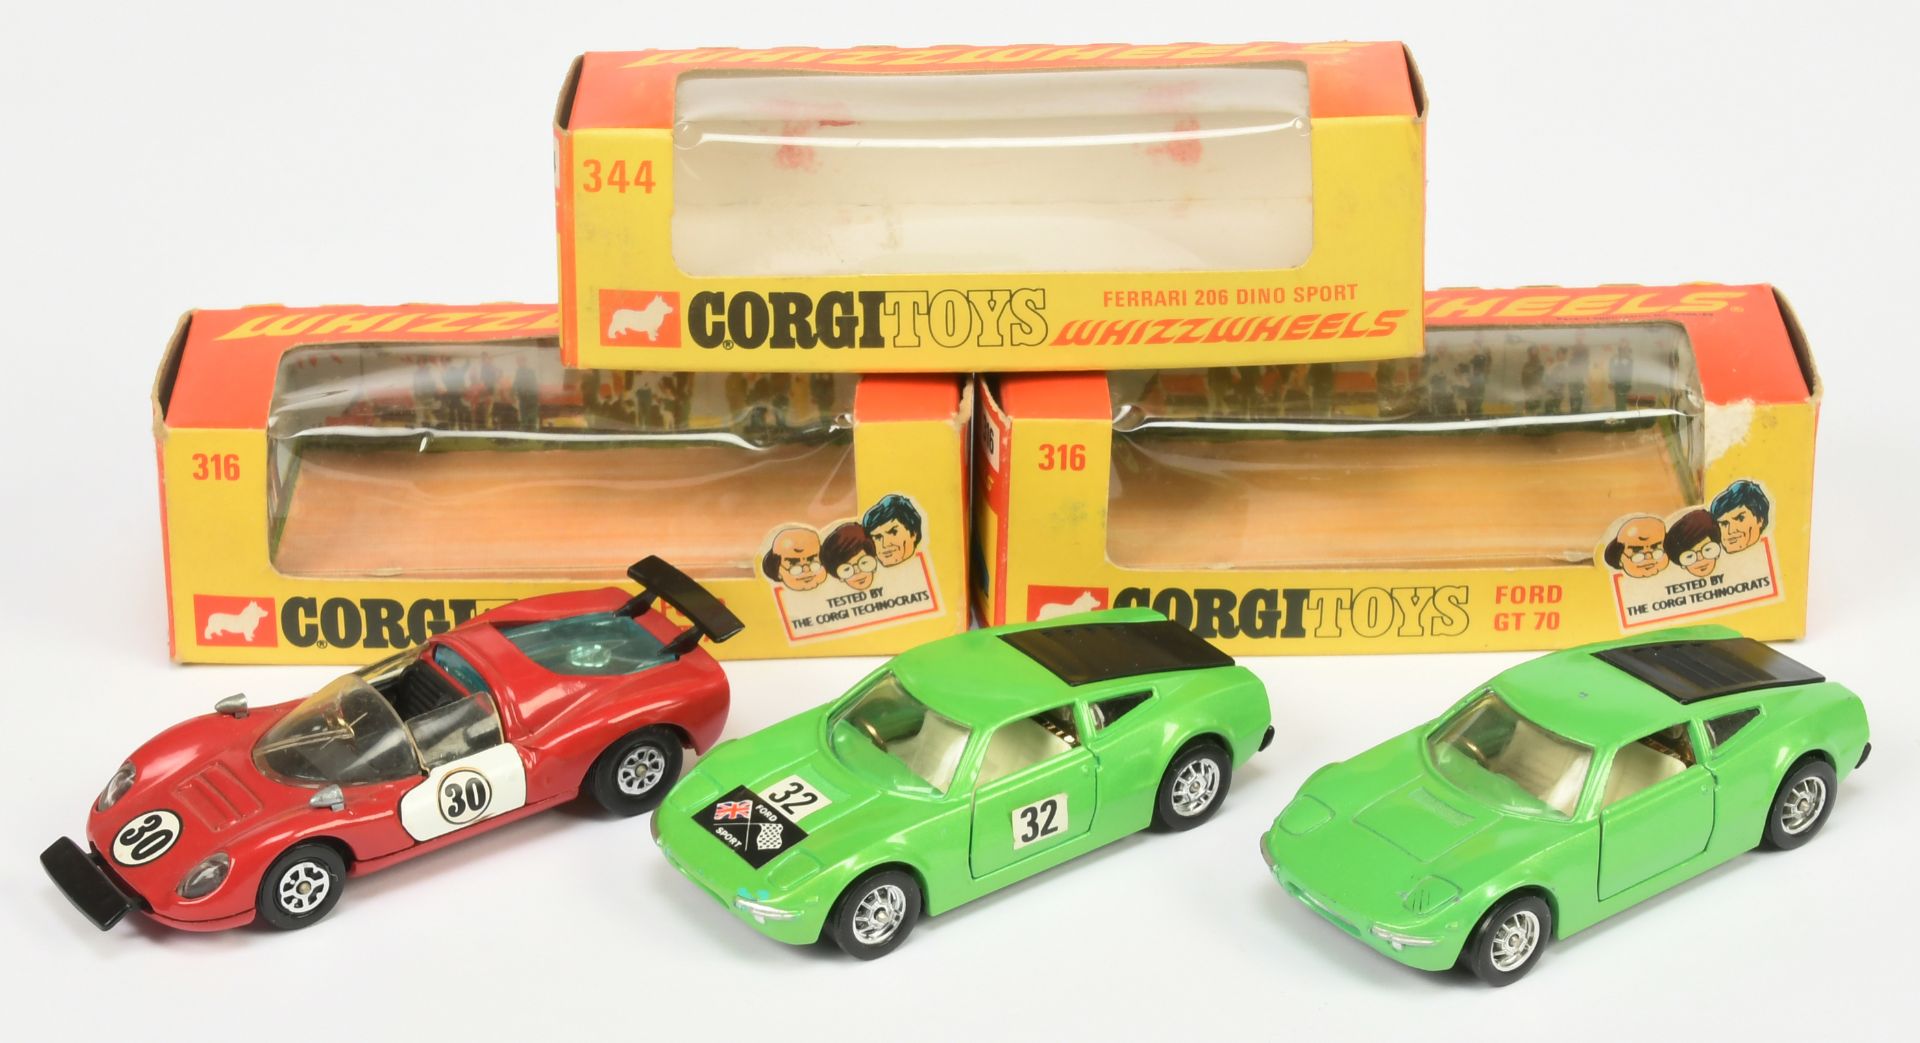 Corgi Toys Whizzwheels A Group Of 3 - (1) 316 Ford GT 70 - Green, black engine cover, with labels...